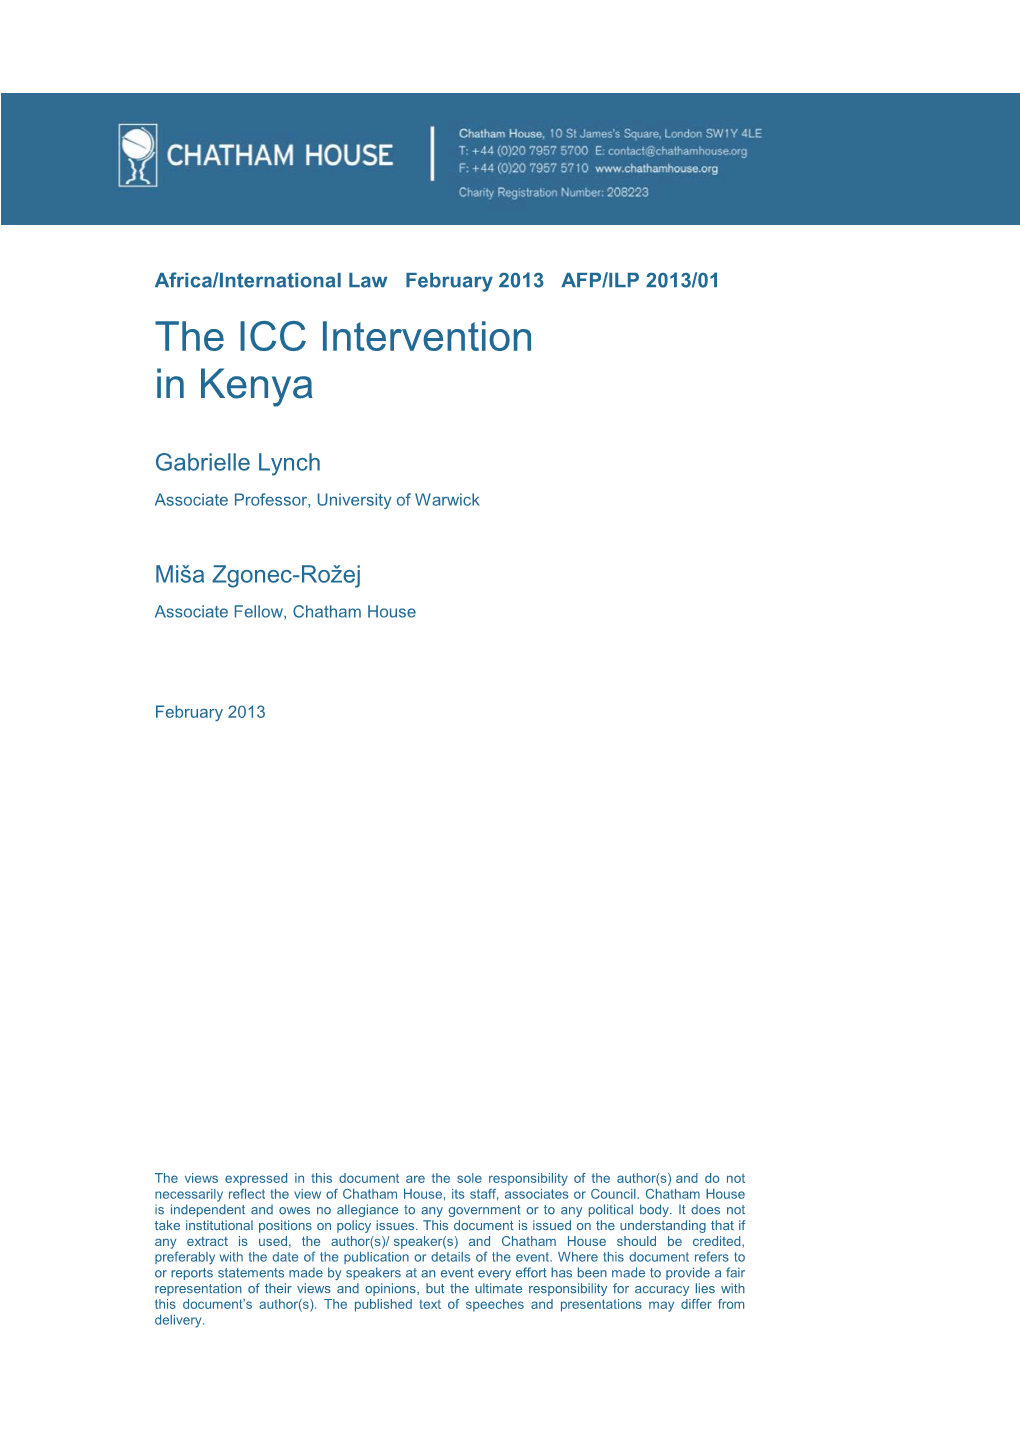 The ICC Intervention in Kenya